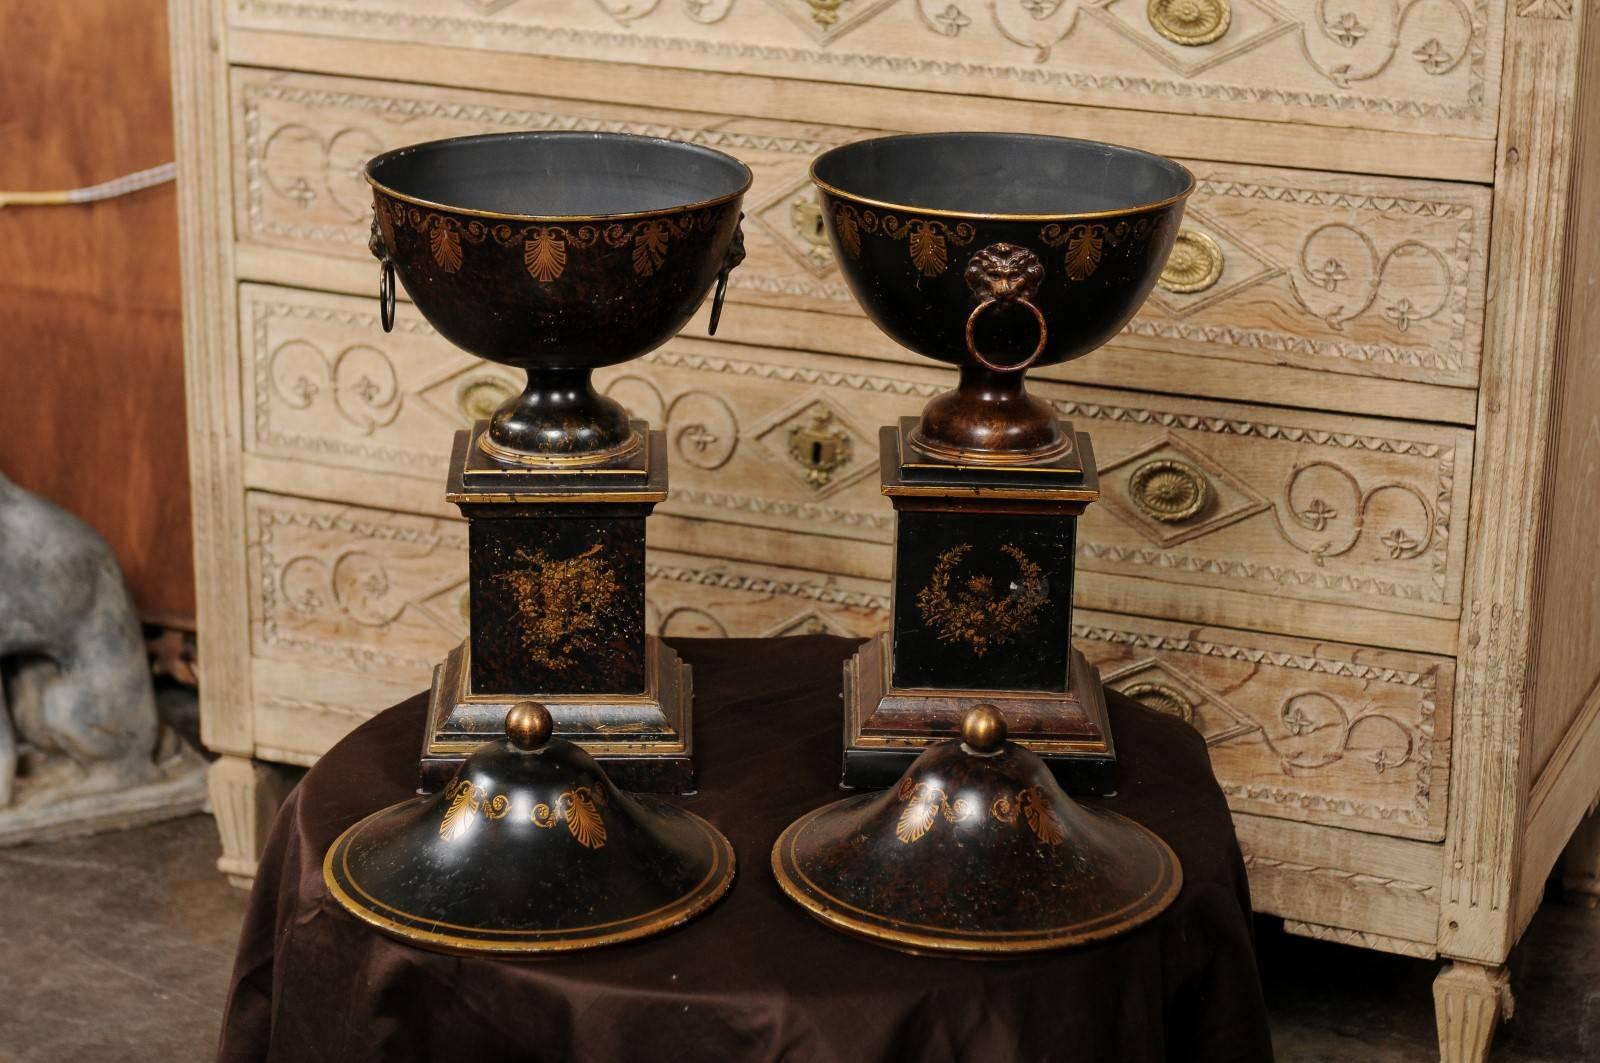 Pair of French 1920s Tole Black Tole Urns on Pedestals with Gilded Accents 5